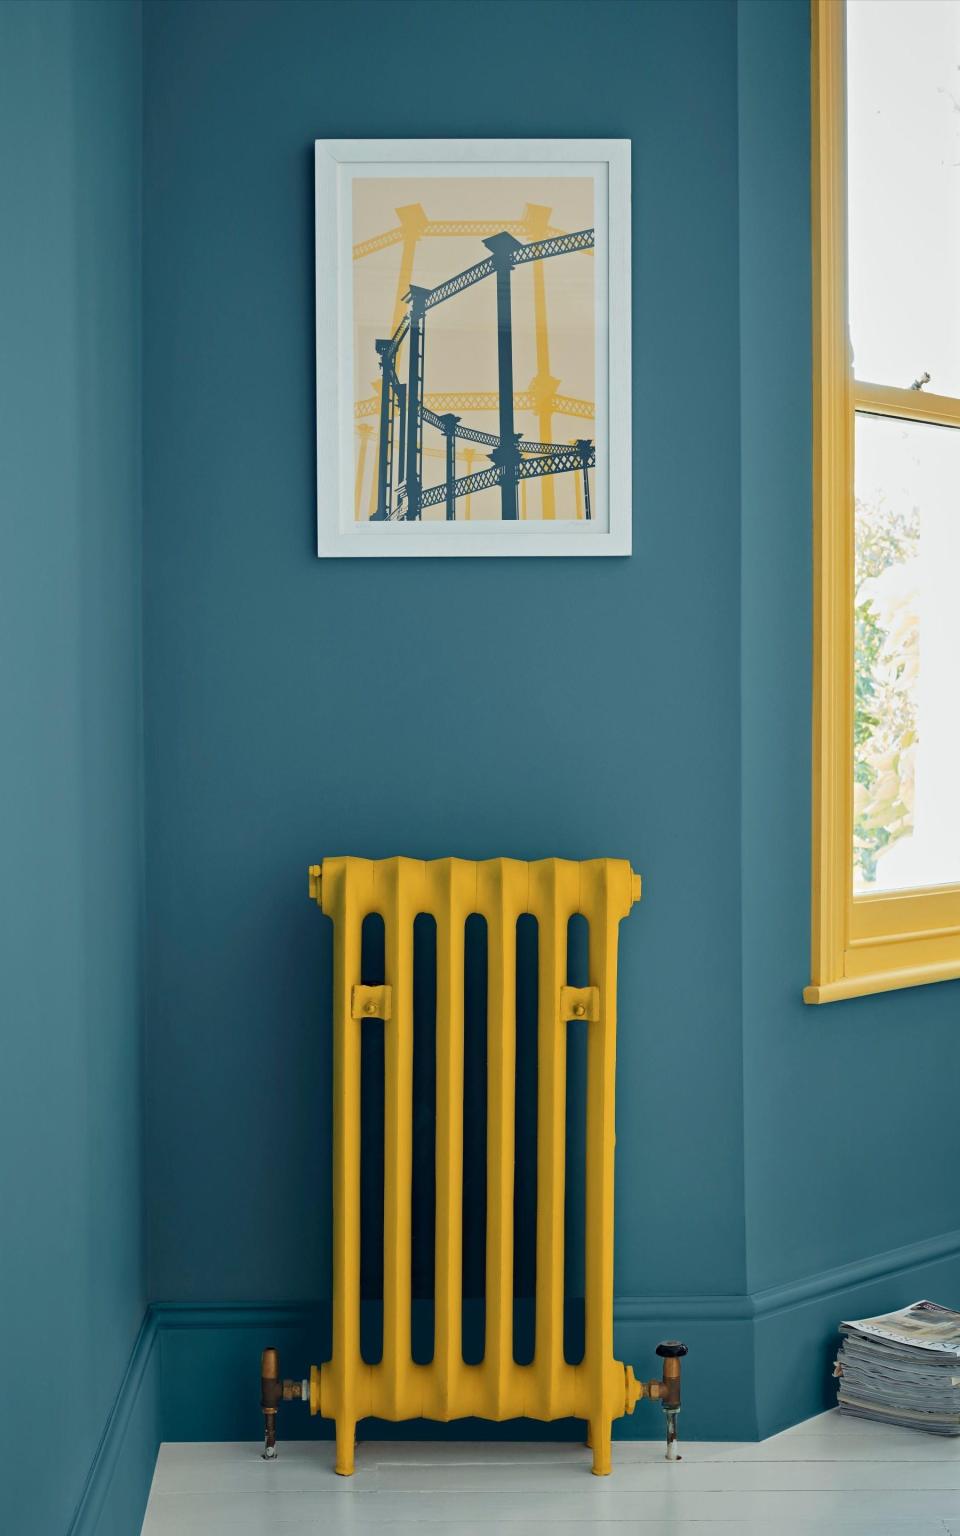 Give a radiator (and matching woodwork) a bright new look - Crown Paints